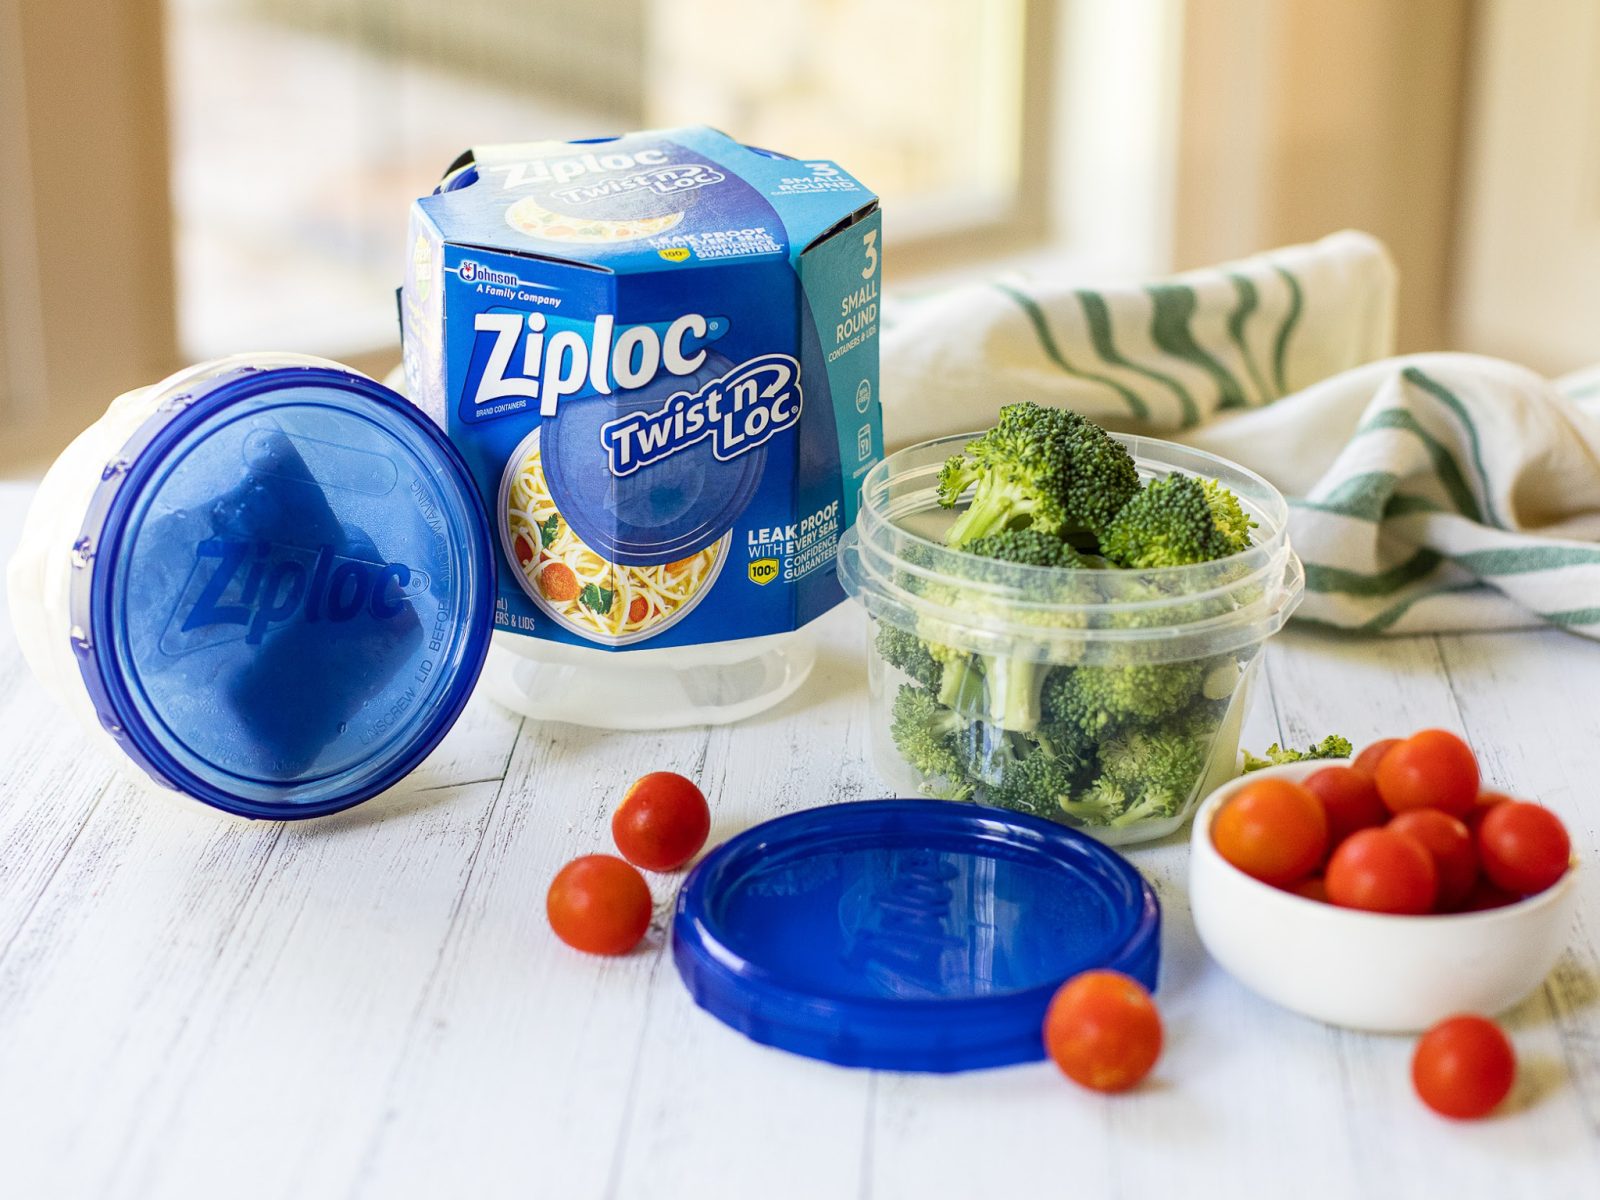 Grab Ziploc Food Storage Containers For Just $2 Per Pack At Kroger